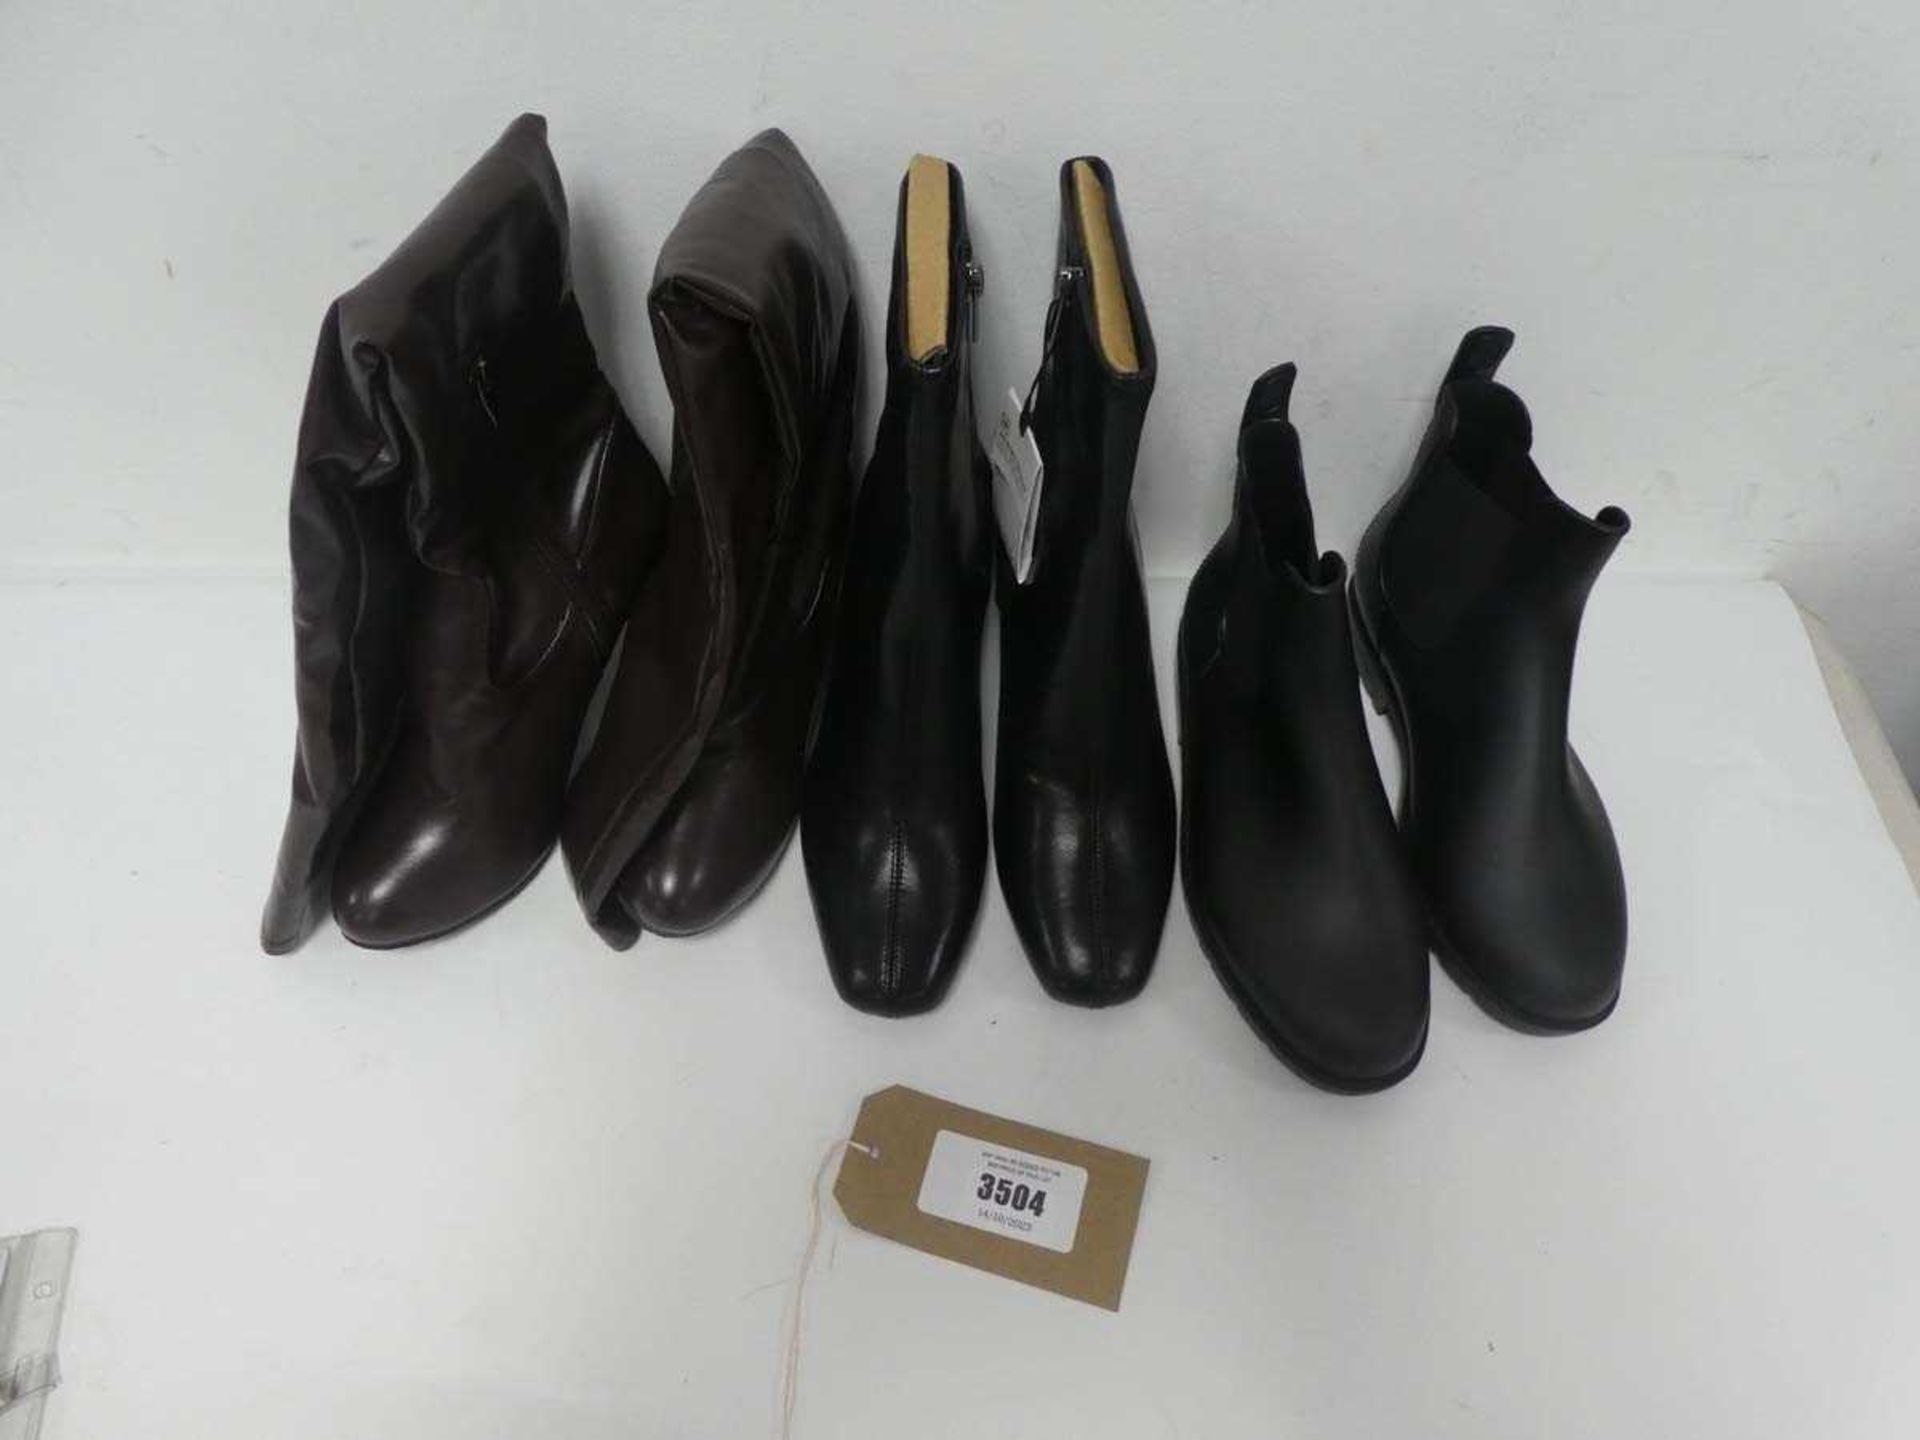 +VAT 3 pairs of boots in various styles and sizes